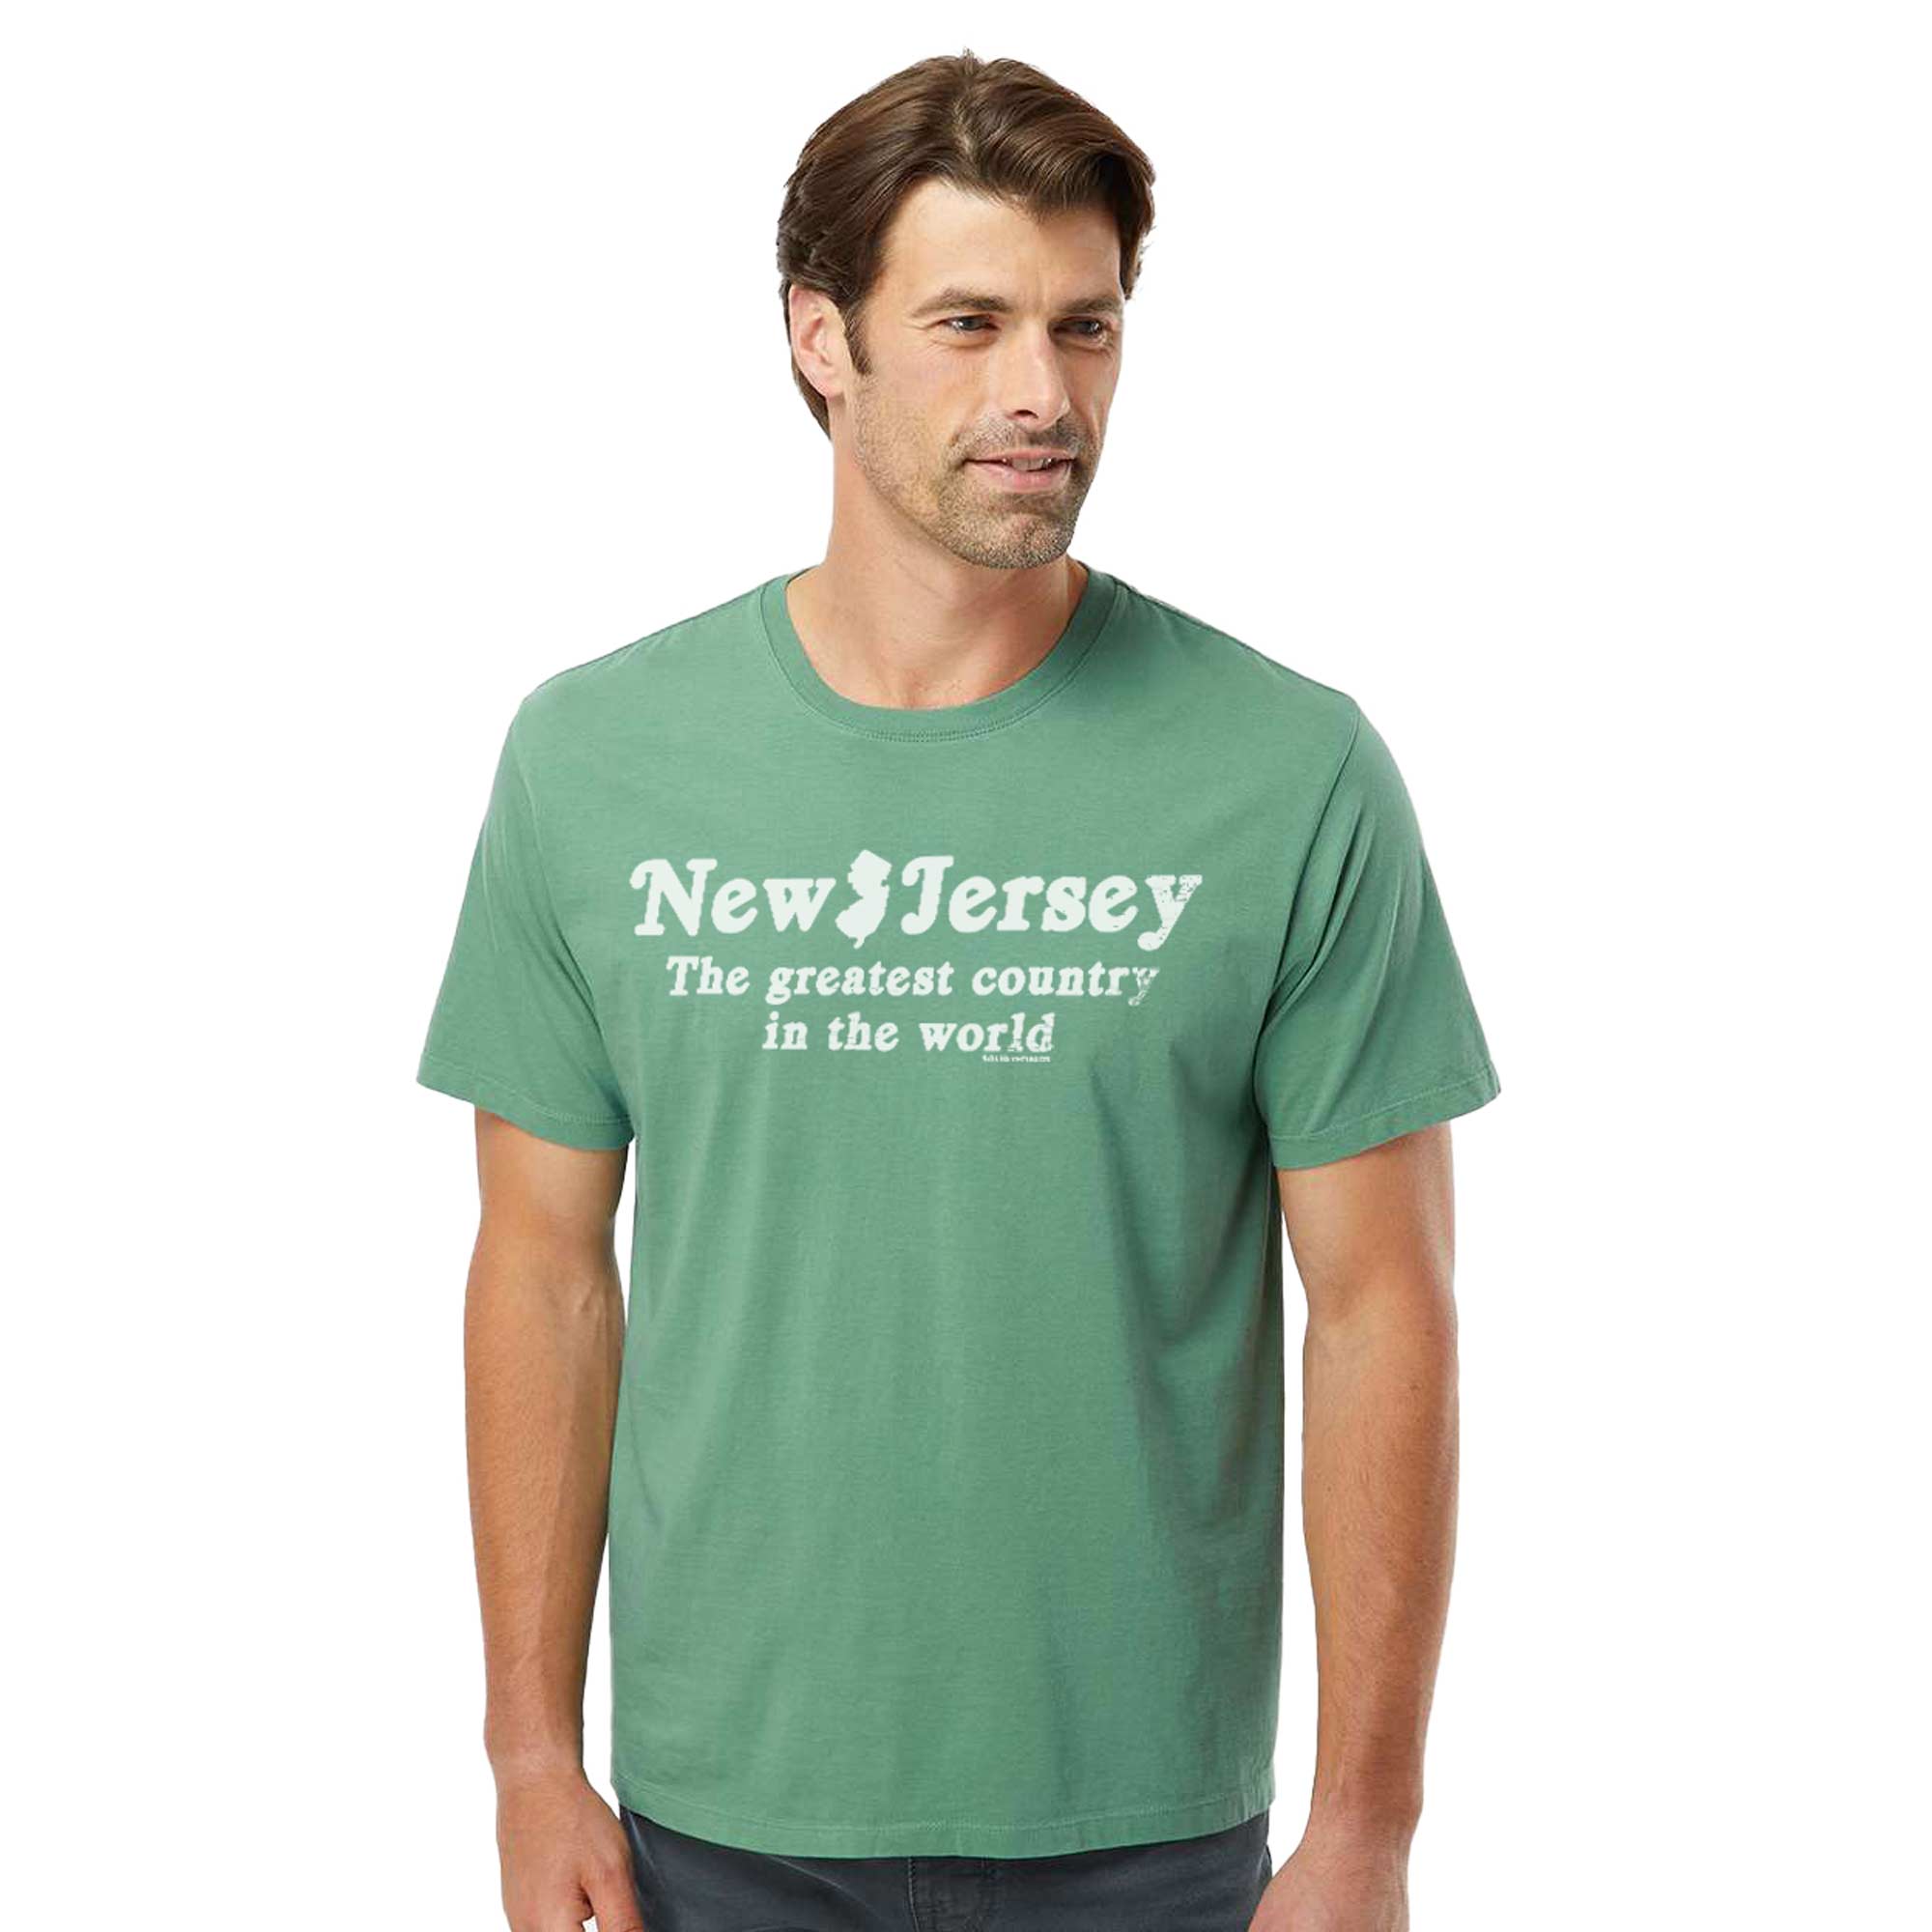 New Jersey The Greatest Country In The World Vintage Organic Cotton T-shirt | Funny Garden State  Tee On Model | Solid Threads